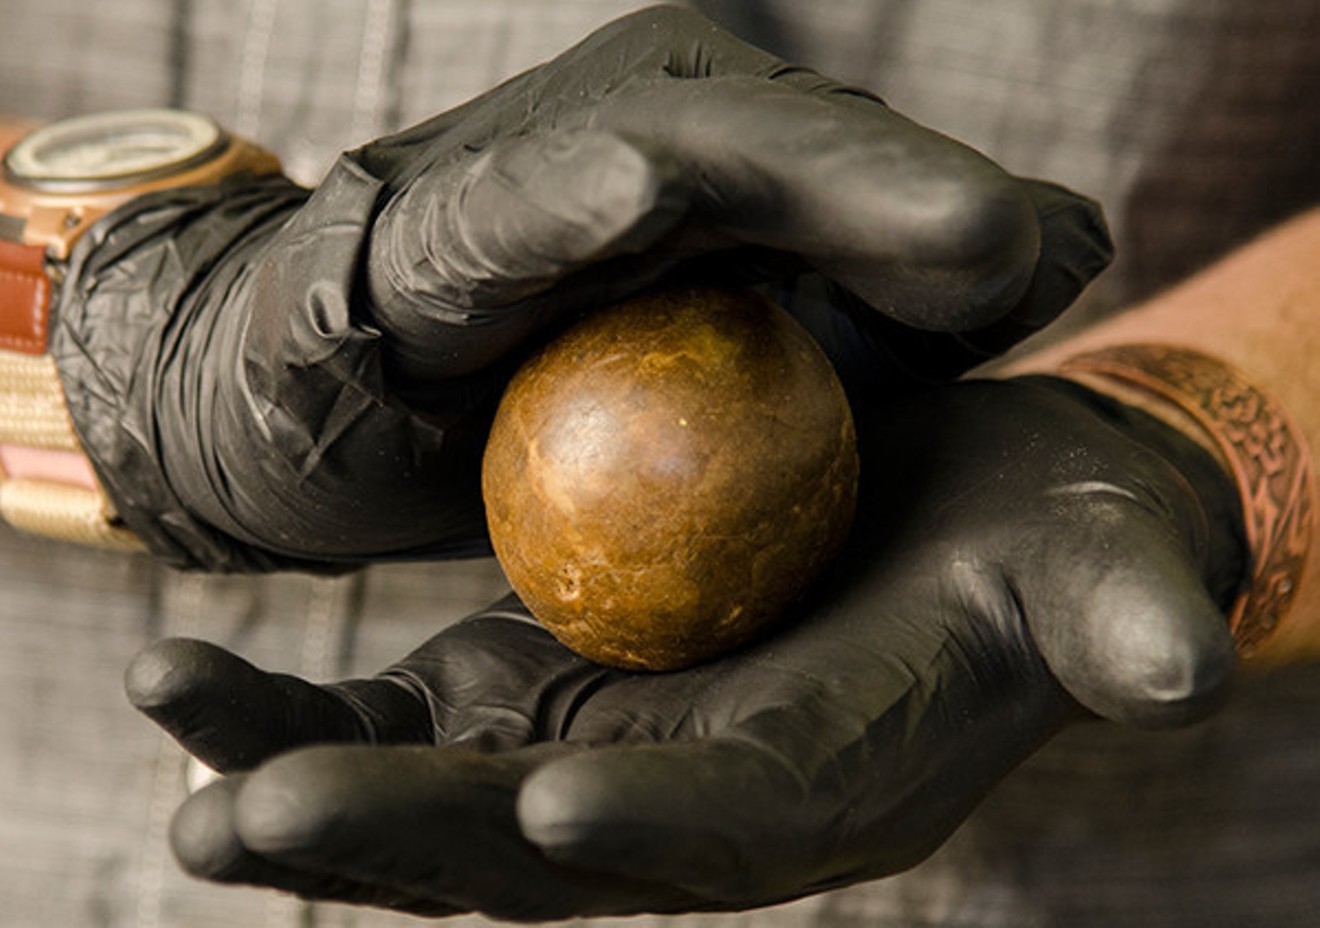 A ball of Moroccan hash, a classic form of hashish, is rolled at the Greenery Hash Factory.